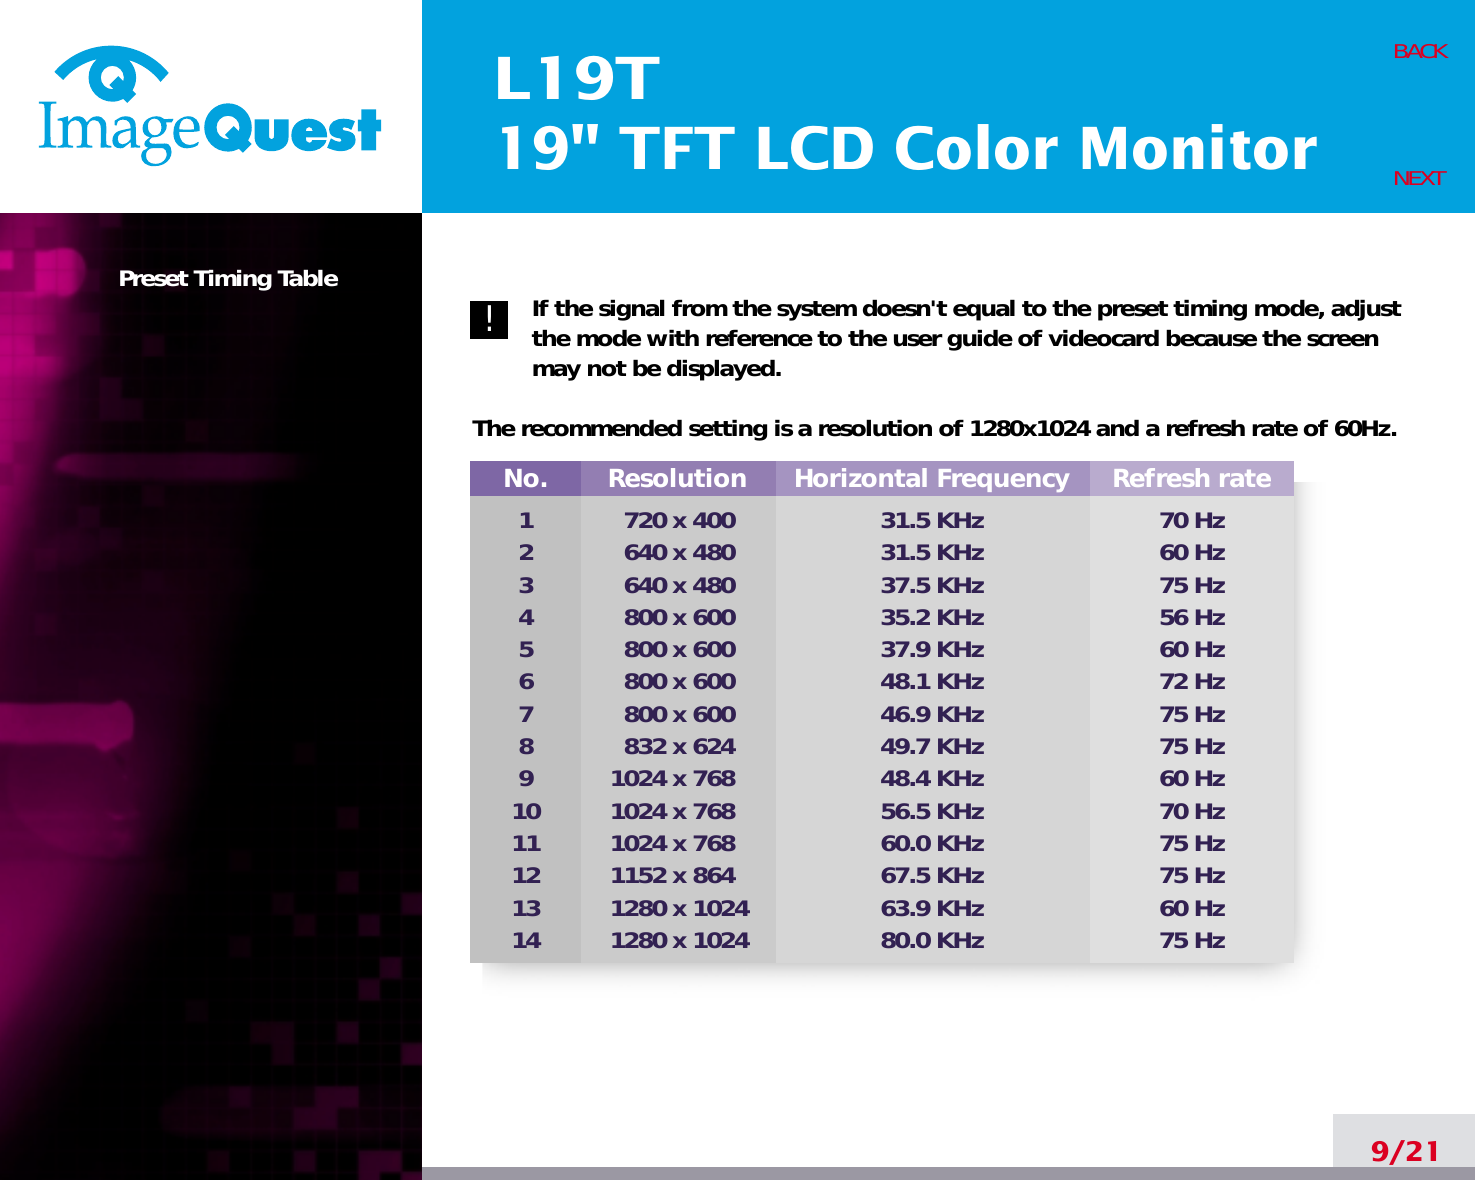 L19T19&quot; TFT LCD Color MonitorPreset Timing Table If the signal from the system doesn&apos;t equal to the preset timing mode, adjustthe mode with reference to the user guide of videocard because the screenmay not be displayed.The recommended setting is a resolution of 1280x1024 and a refresh rate of 60Hz.9/21BACKNEXT!No.1234567891011121314Resolution720 x 400640 x 480640 x 480 800 x 600800 x 600800 x 600800 x 600832 x 6241024 x 7681024 x 7681024 x 7681152 x 8641280 x 10241280 x 1024Horizontal Frequency31.5 KHz31.5 KHz37.5 KHz35.2 KHz37.9 KHz48.1 KHz46.9 KHz49.7 KHz48.4 KHz56.5 KHz60.0 KHz67.5 KHz63.9 KHz80.0 KHzRefresh rate70 Hz60 Hz75 Hz56 Hz60 Hz72 Hz75 Hz75 Hz60 Hz70 Hz75 Hz75 Hz60 Hz75 Hz